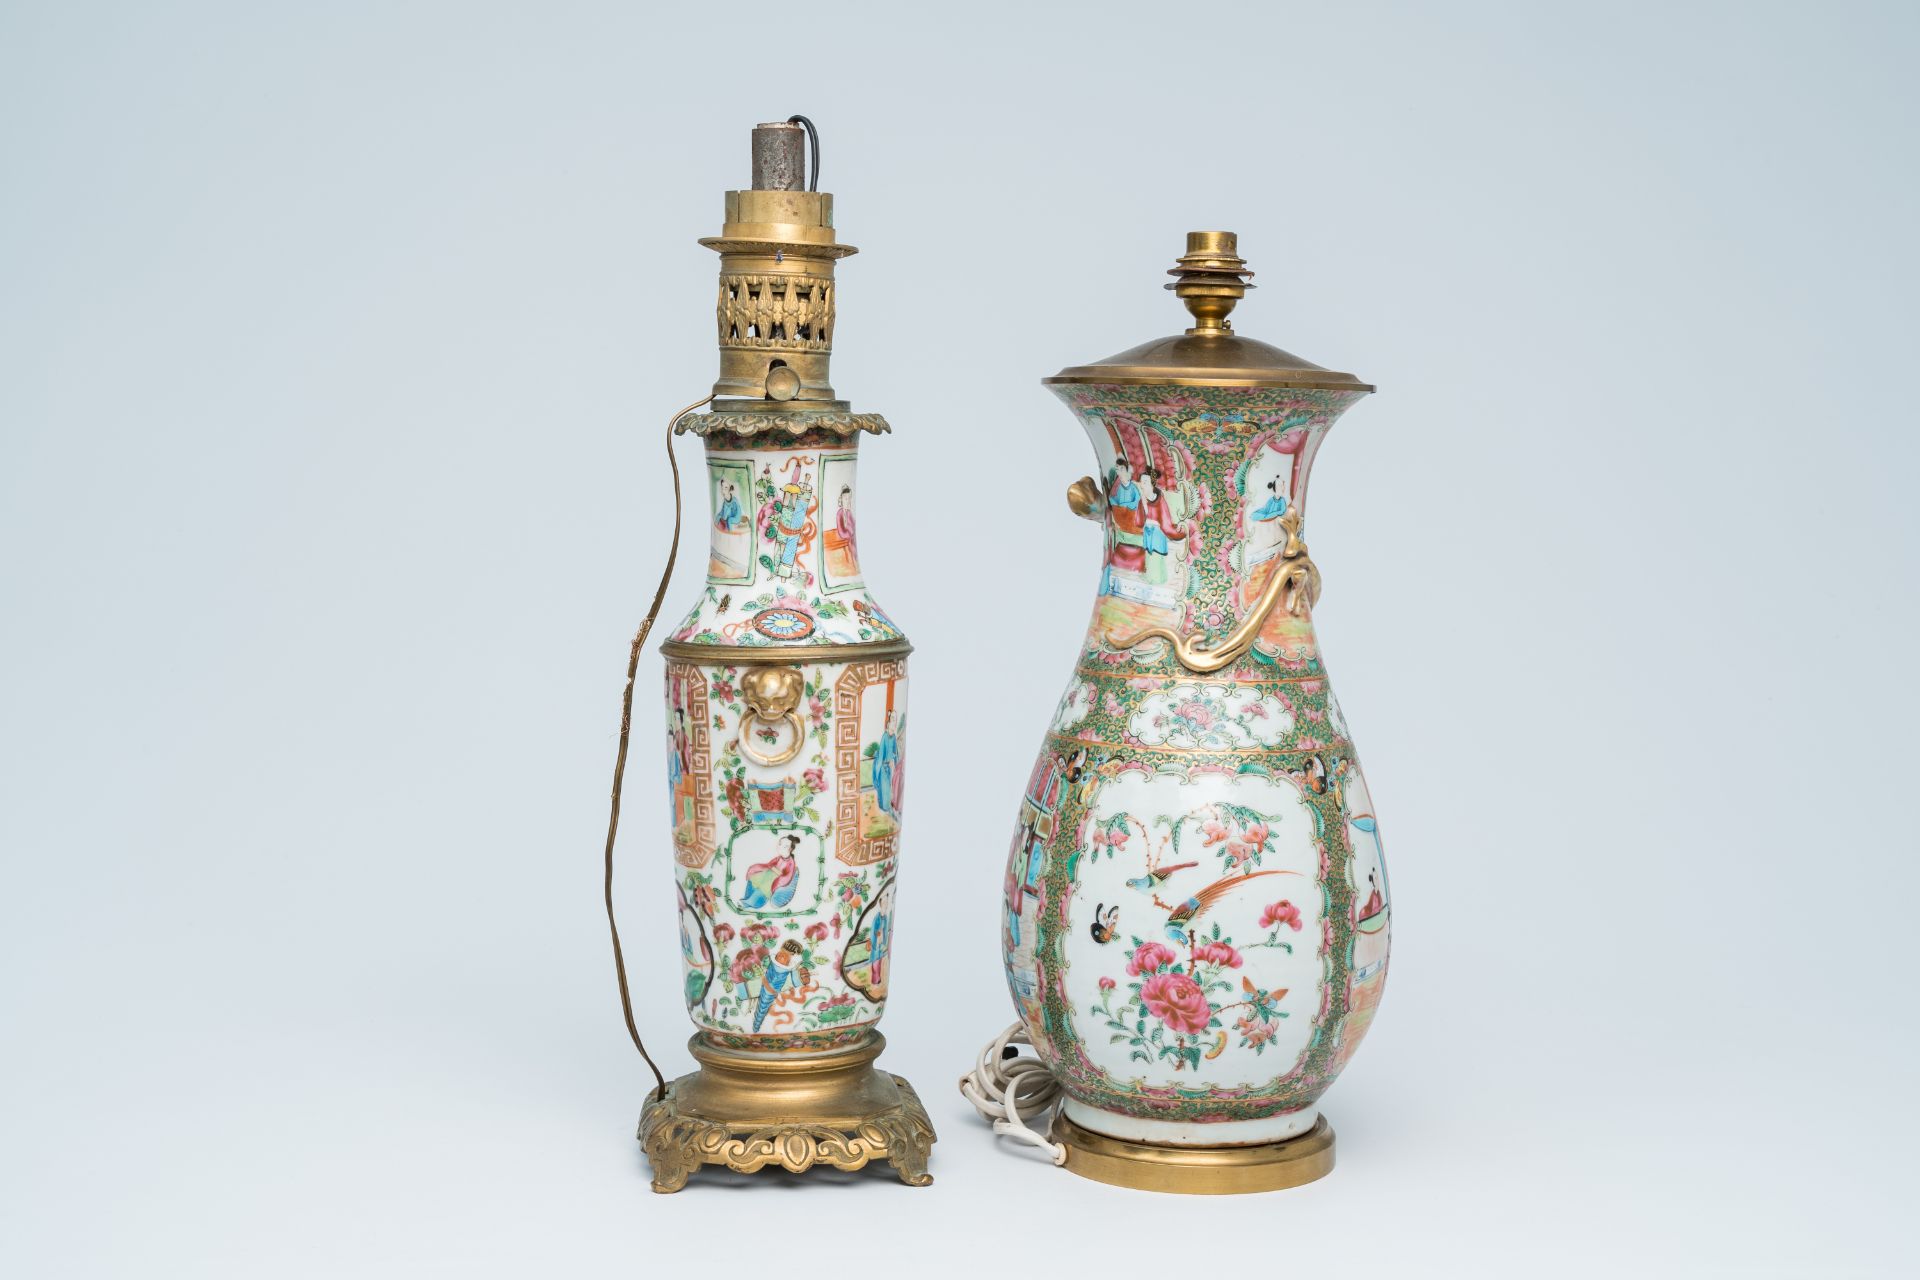 Two Chinese Canton famille rose vases with palace scenes and floral design mounted as lamps, 19th C. - Image 4 of 13